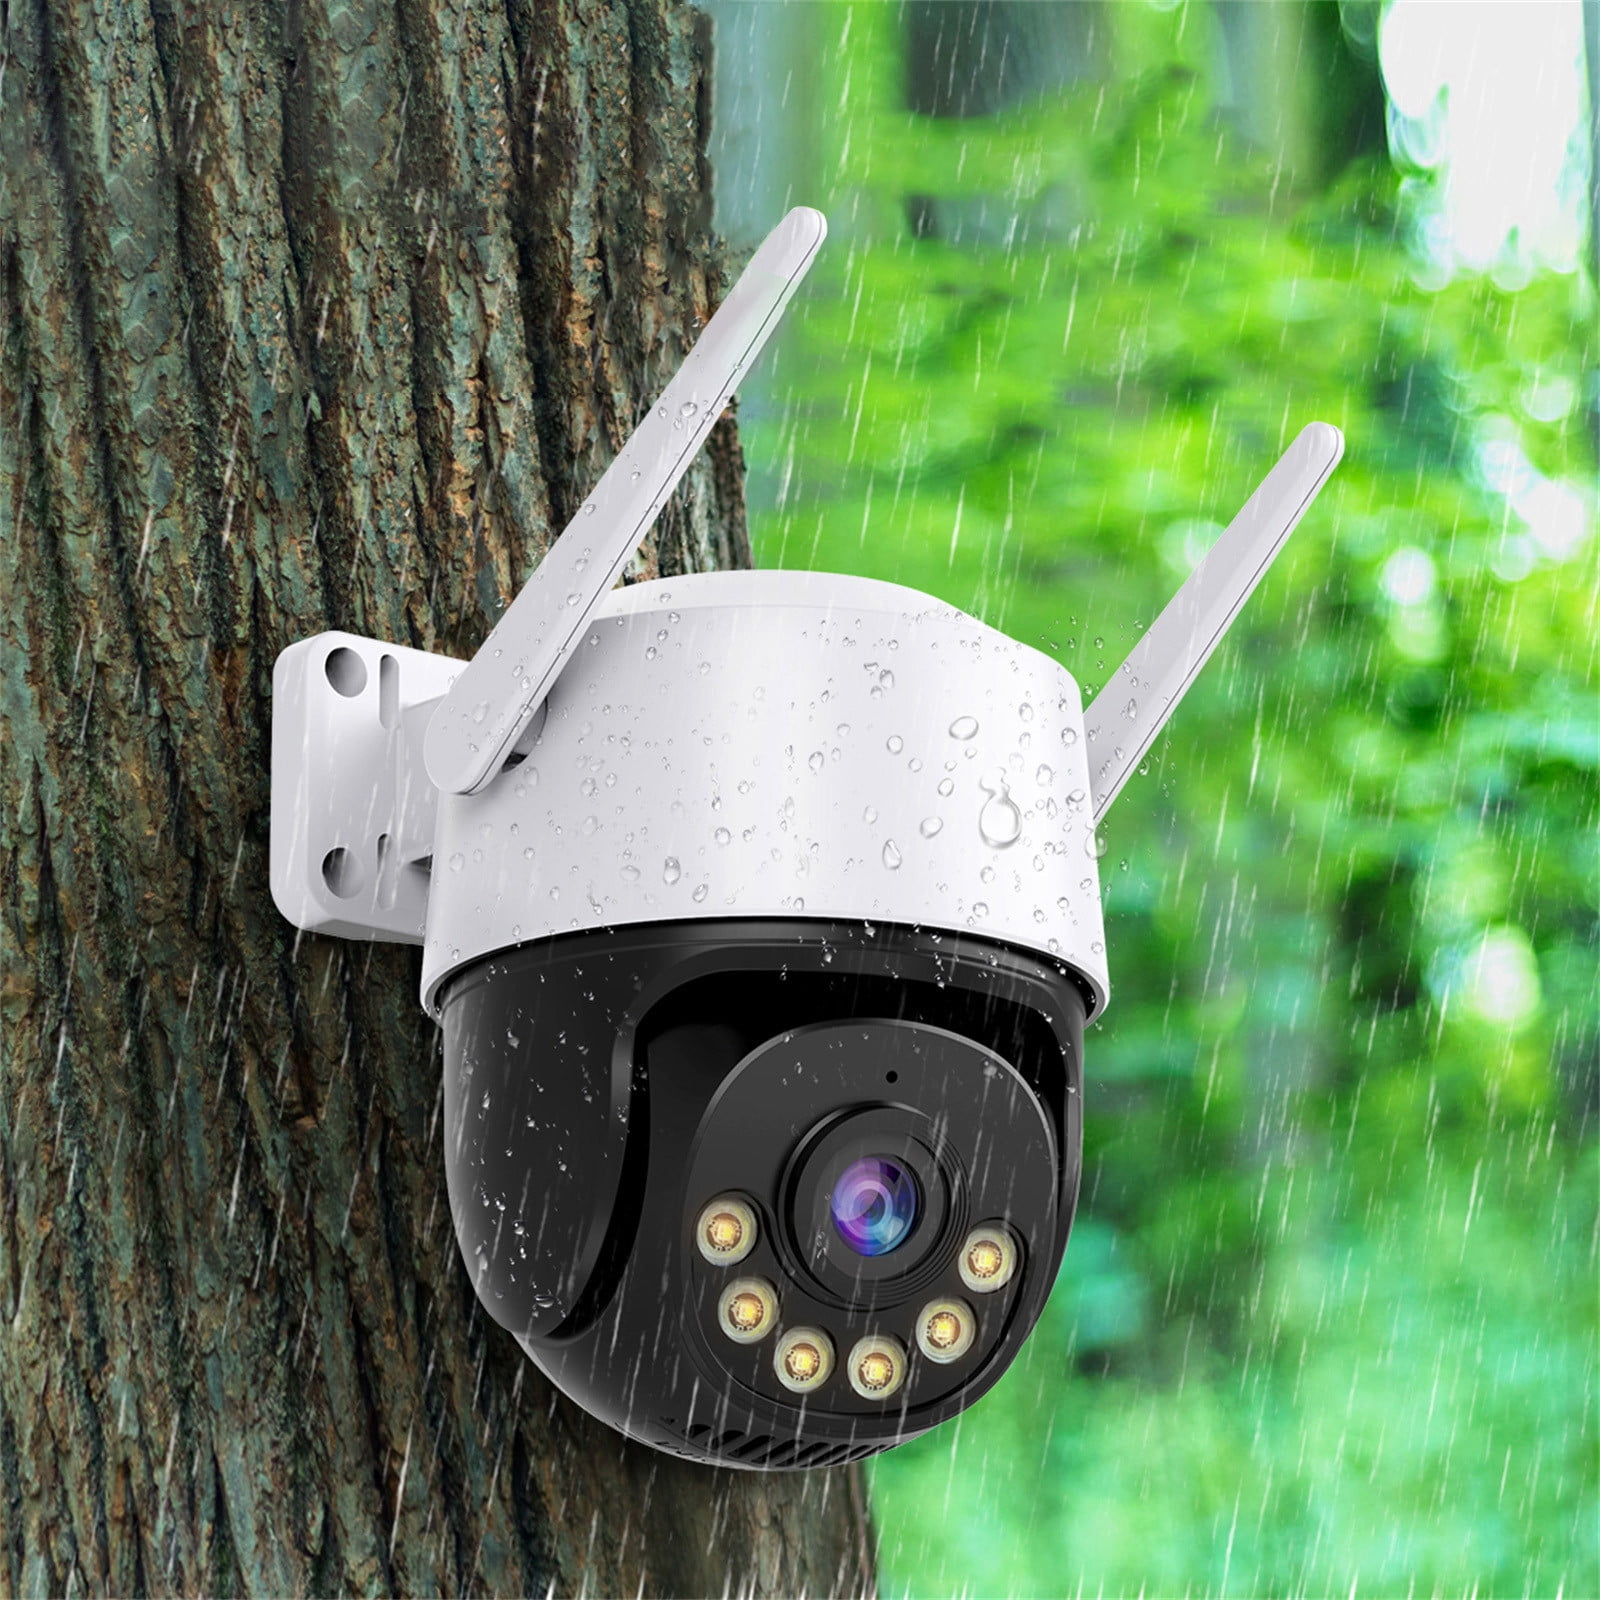 Security Camera Outdoor with Spotlights 1080P Color Night Vision Wired Surveillance Camera 2.4G WiFi Smart Home Black - Walmart.com